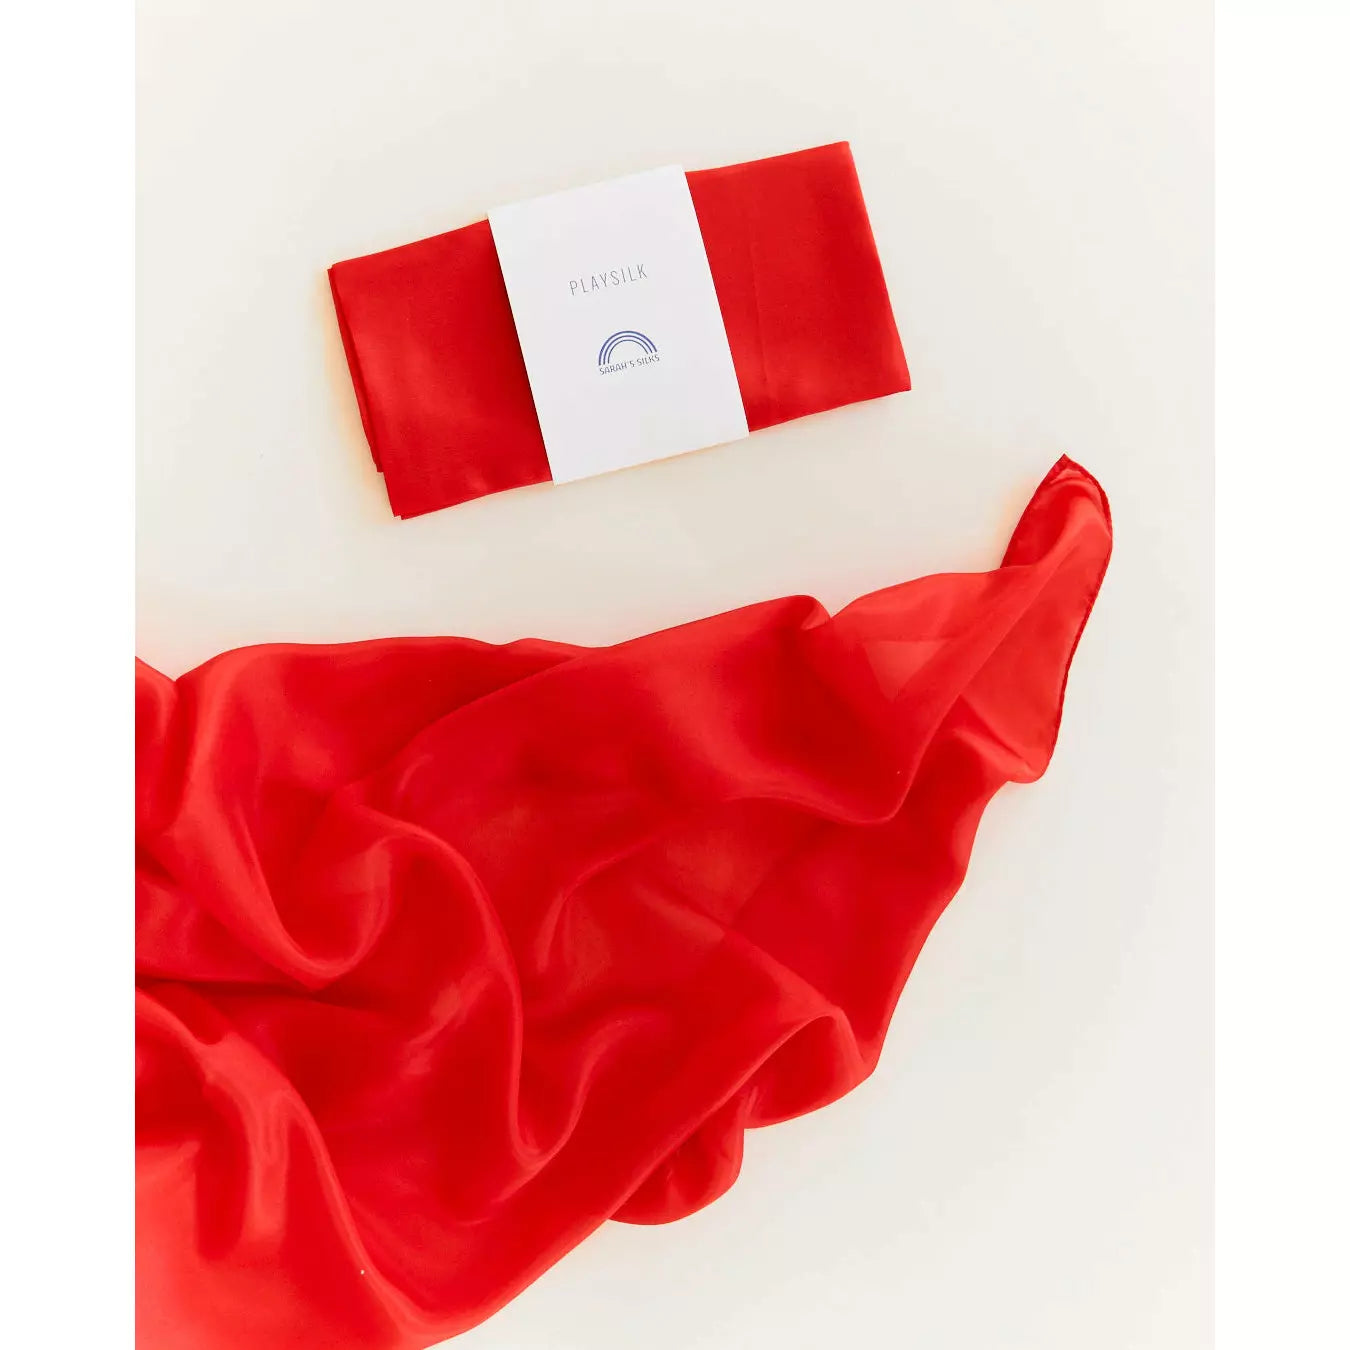 A silk scarf in red.